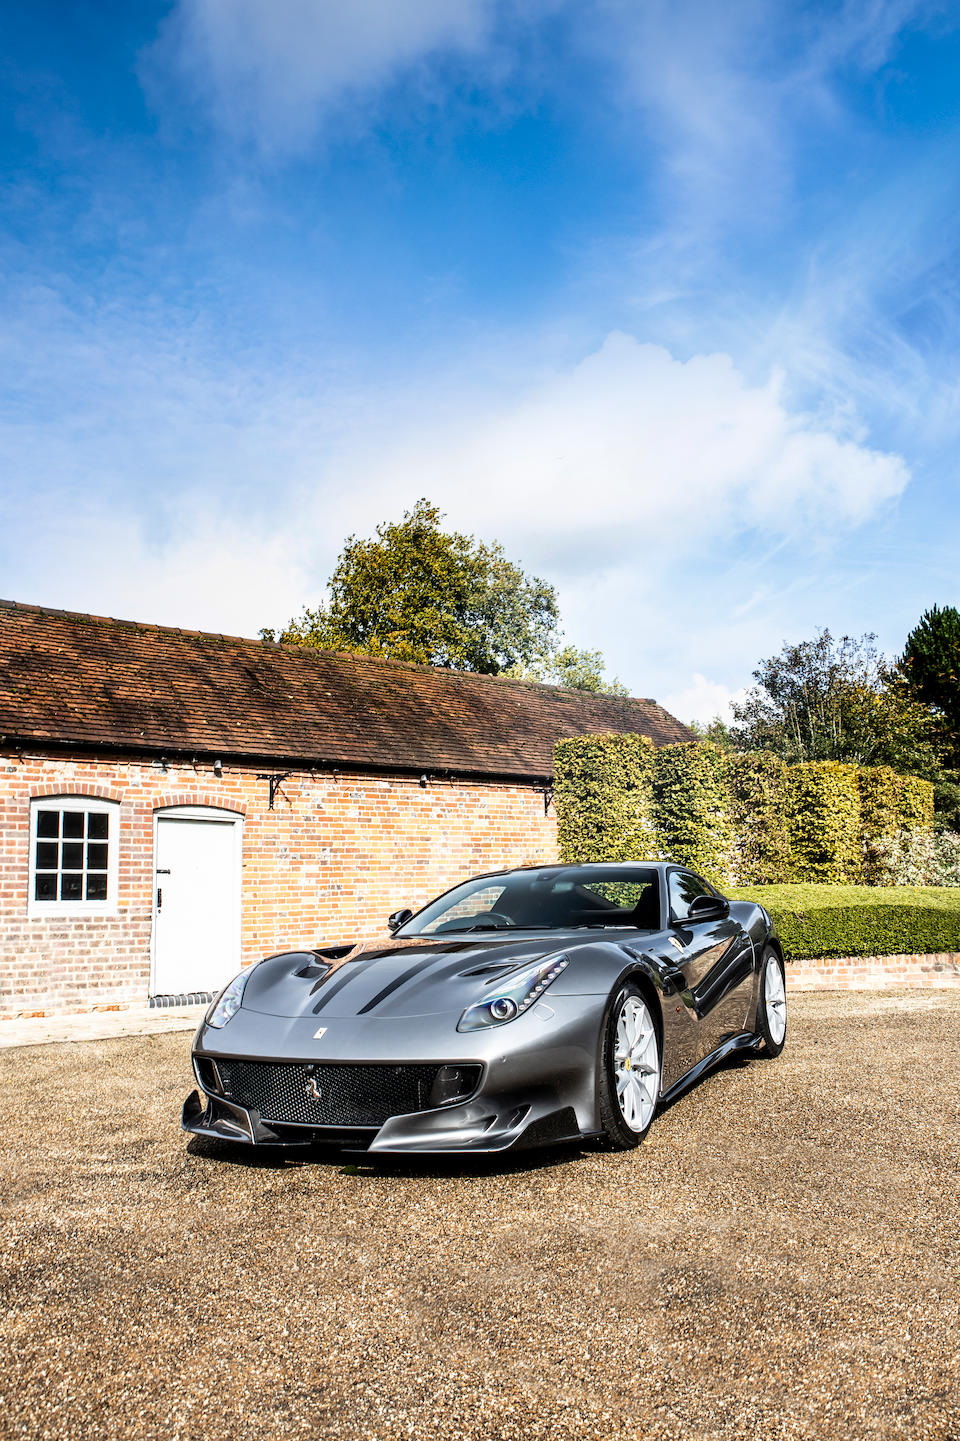 Offered from the collection of Jay Kay. Only 895 miles from new and a right-hand drive example,2016 Ferrari F12tdf Berlinetta  Chassis no. ZFF81BHC000219488